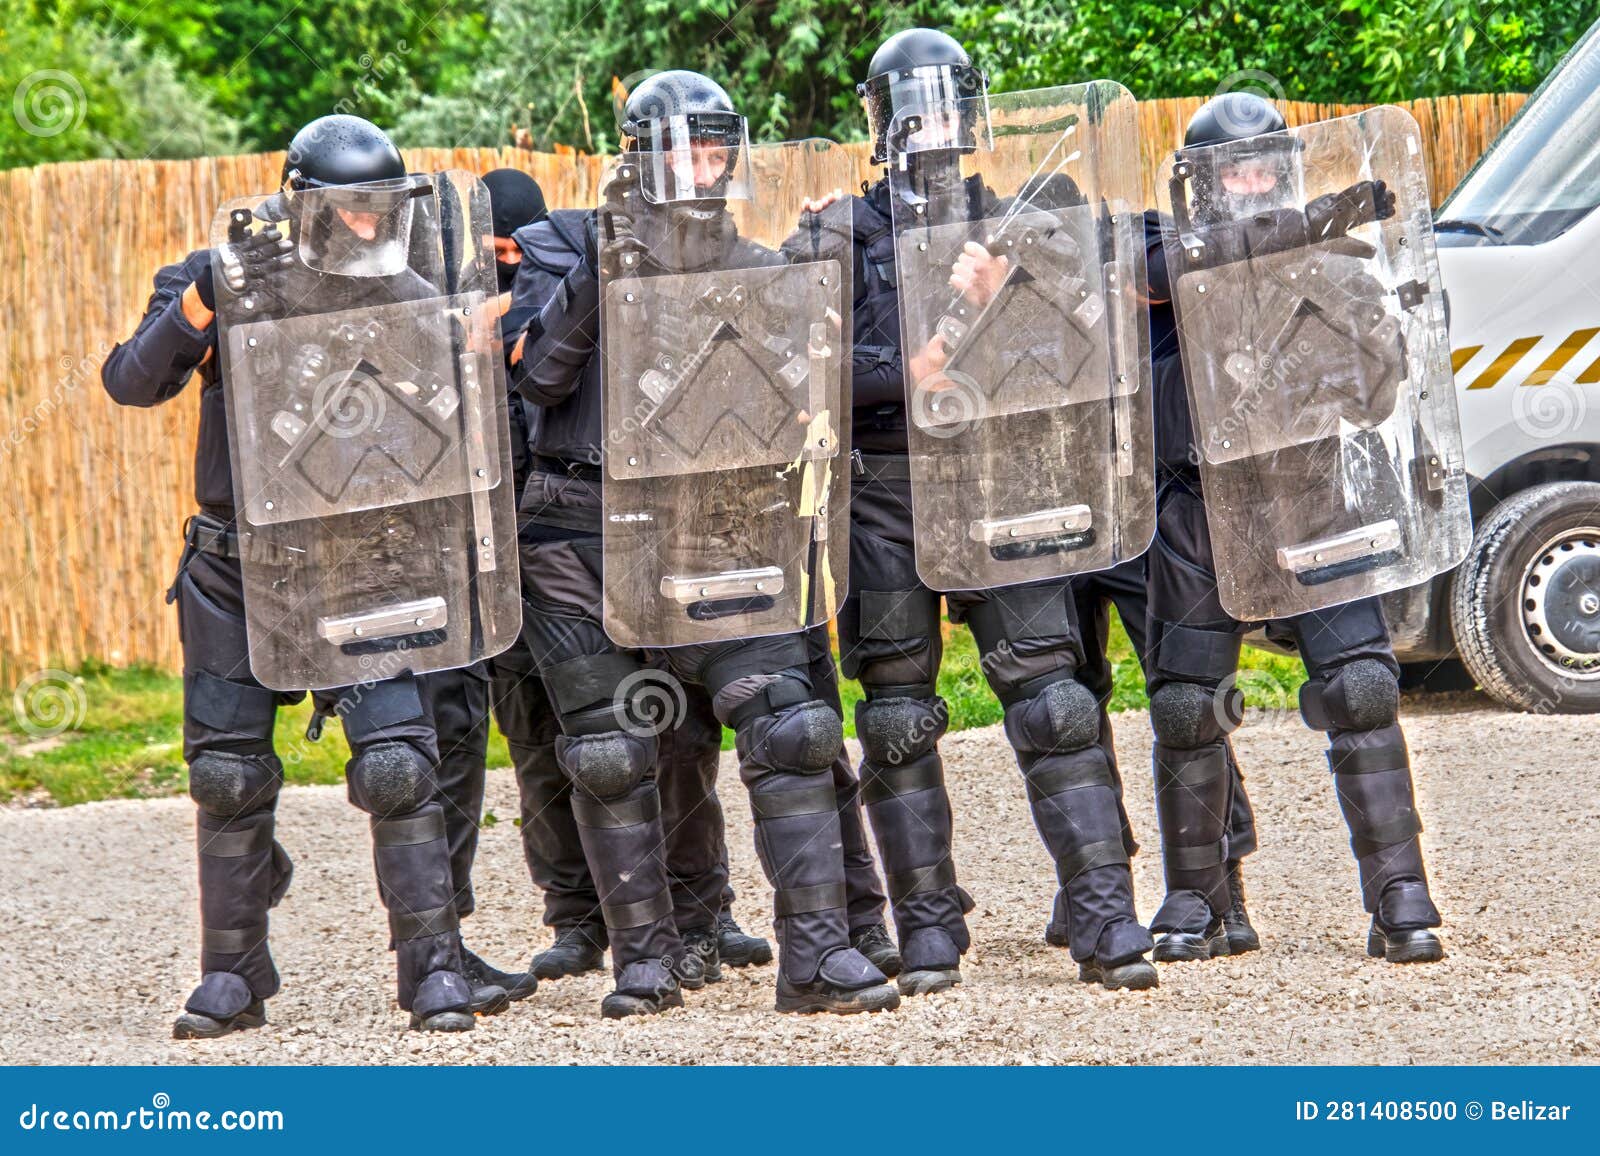 Show of the Hungarian Prison Service in a Zoo Editorial Image - Image ...